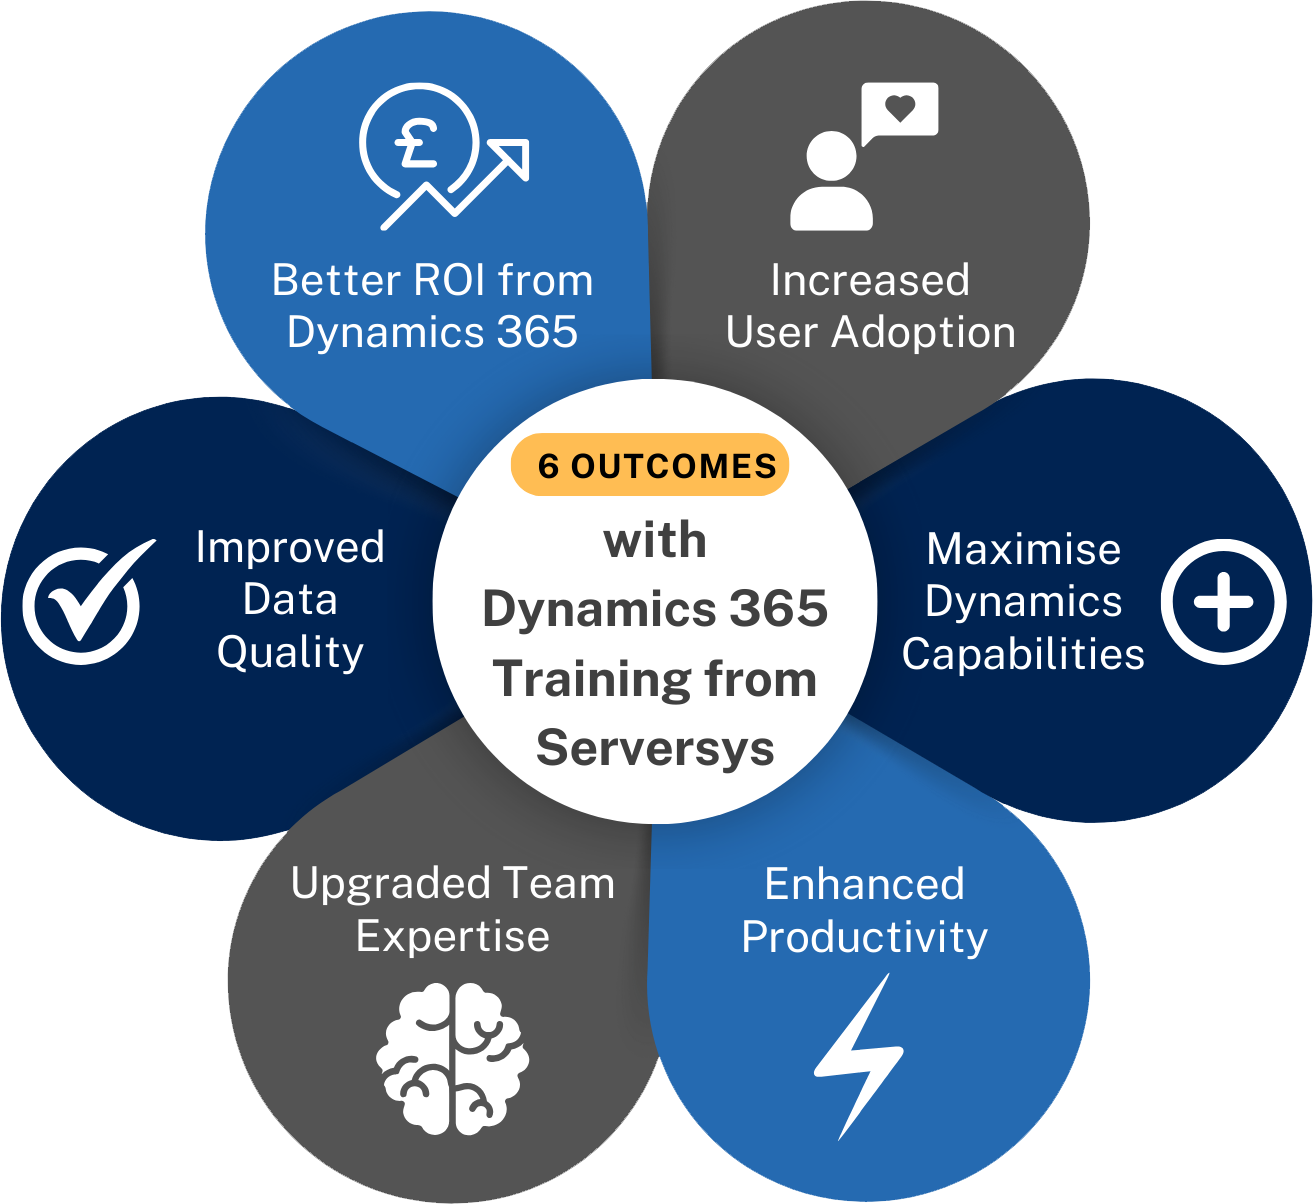 Visualisation showing 6 example outcomes of Dynamics 365 training sessions from ServerSys